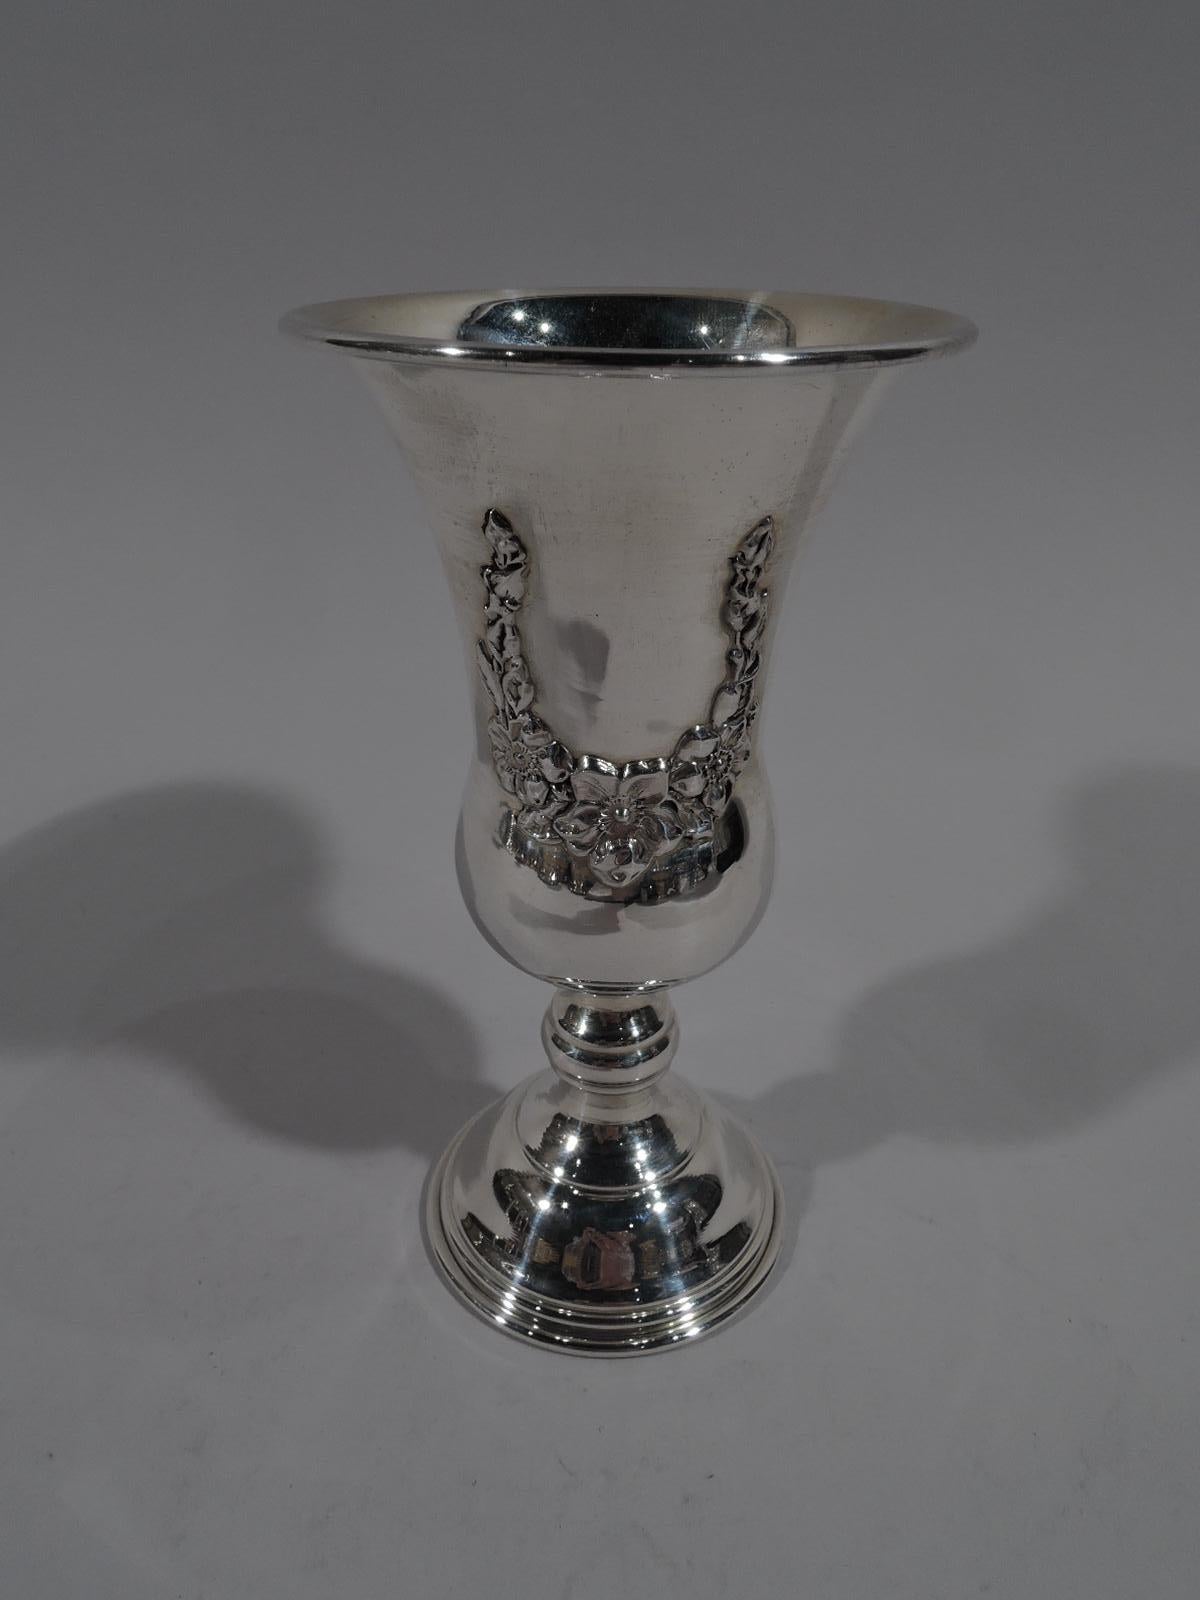 Traditional sterling silver Kiddush cup. Tapering with gently bellied bowl; knopped stem and domed foot. Applied ornament: Star of David on front, and floral garlands on front and back. Marked “Sterling”. Weight: 2.4 troy ounces.